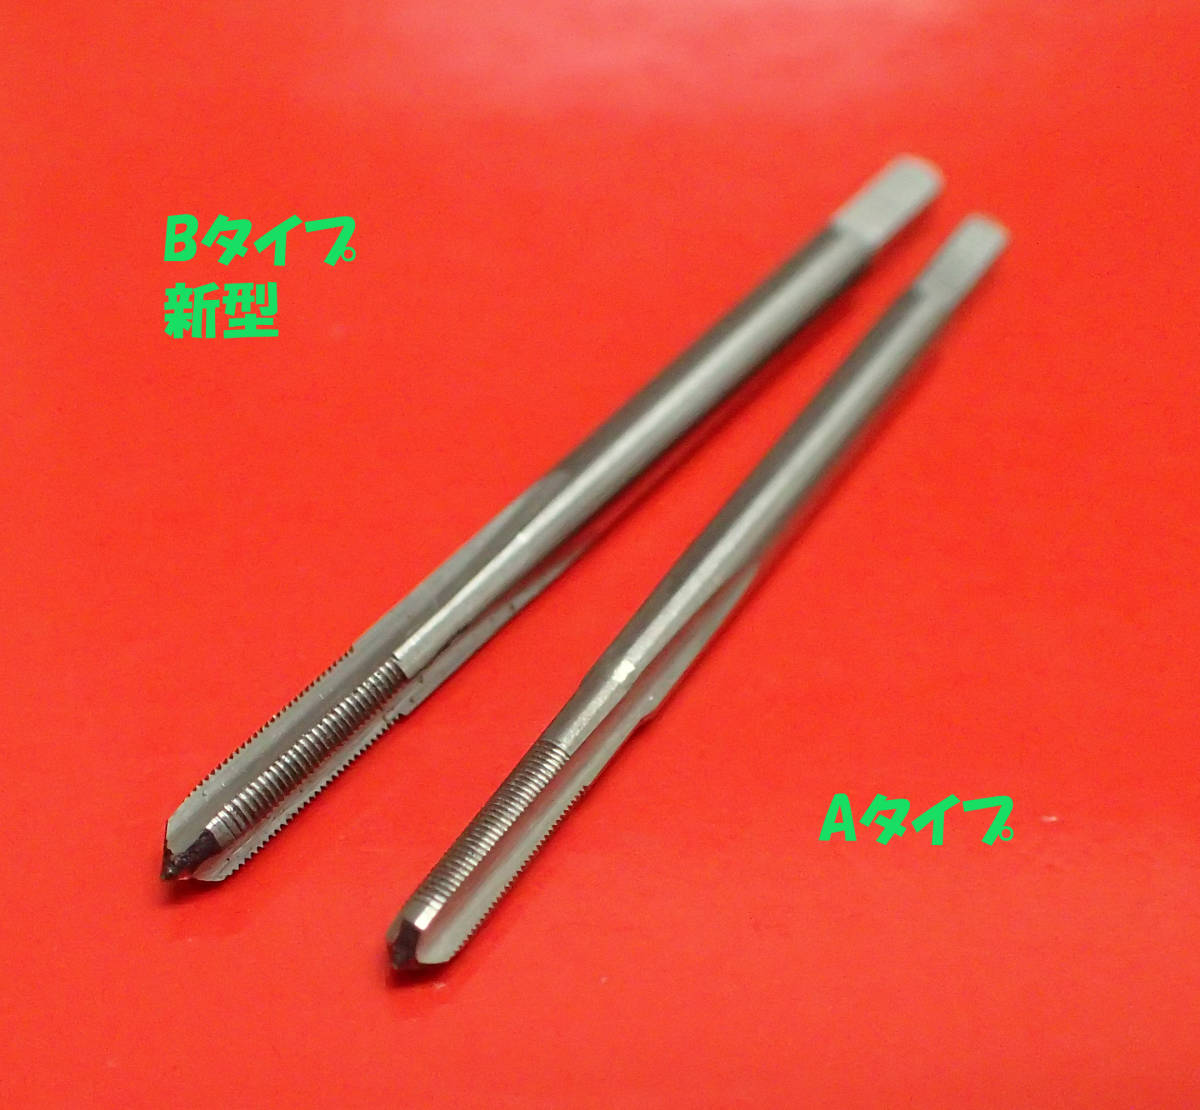 ROLEX Rolex for tube tap 2.5mm 3.0mm( watch stem 4.8mm 5.3mm 6.0mm 7.0mm for )5320 5330 6020 6330 7000 7020 7030[1]